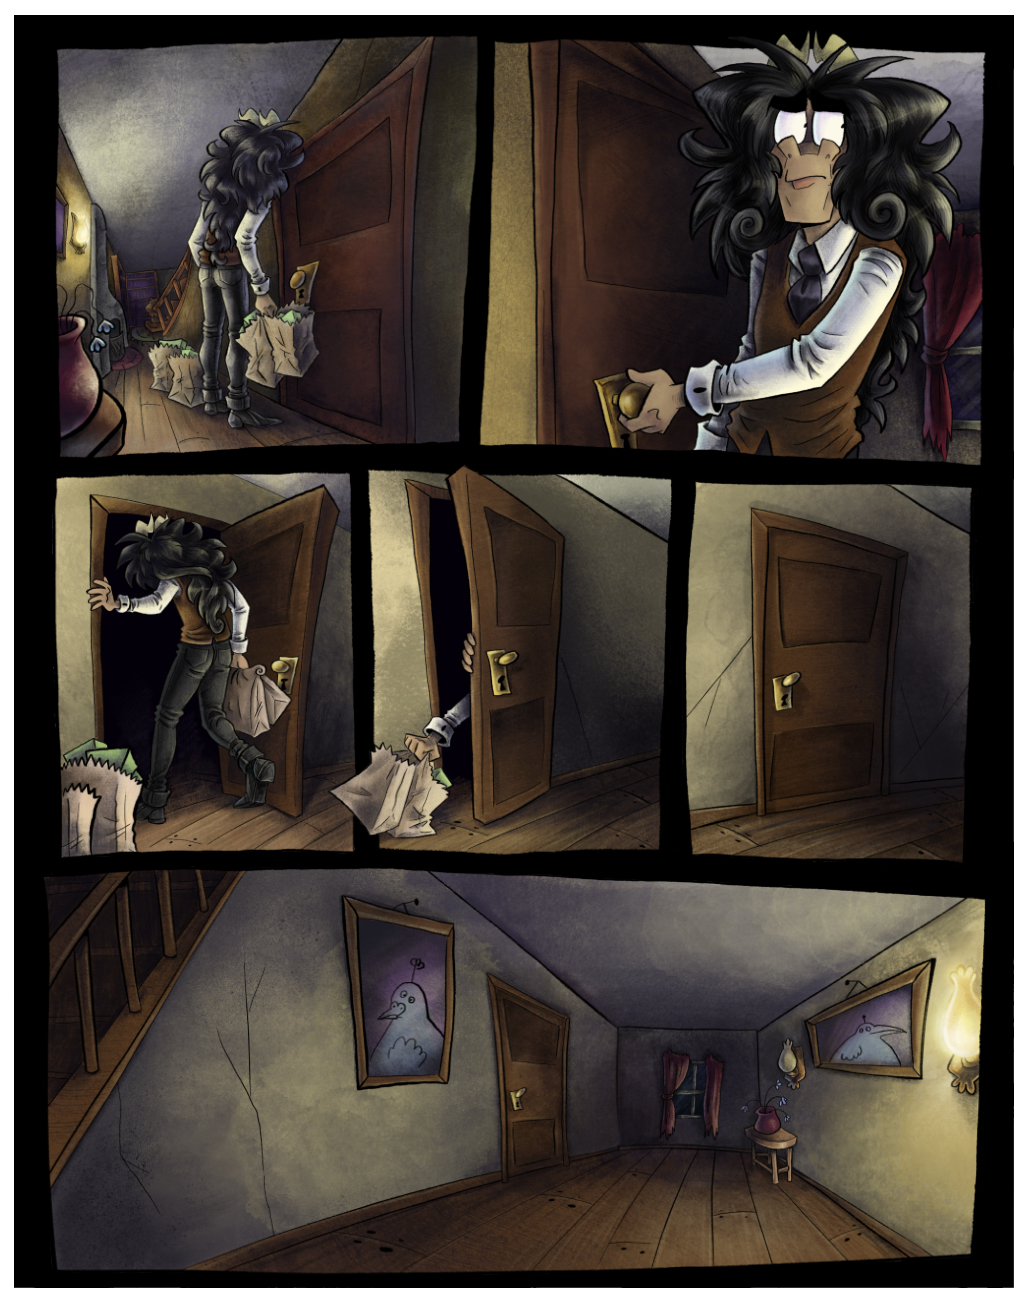 Ch 2 pg 11: Into the Dungeon